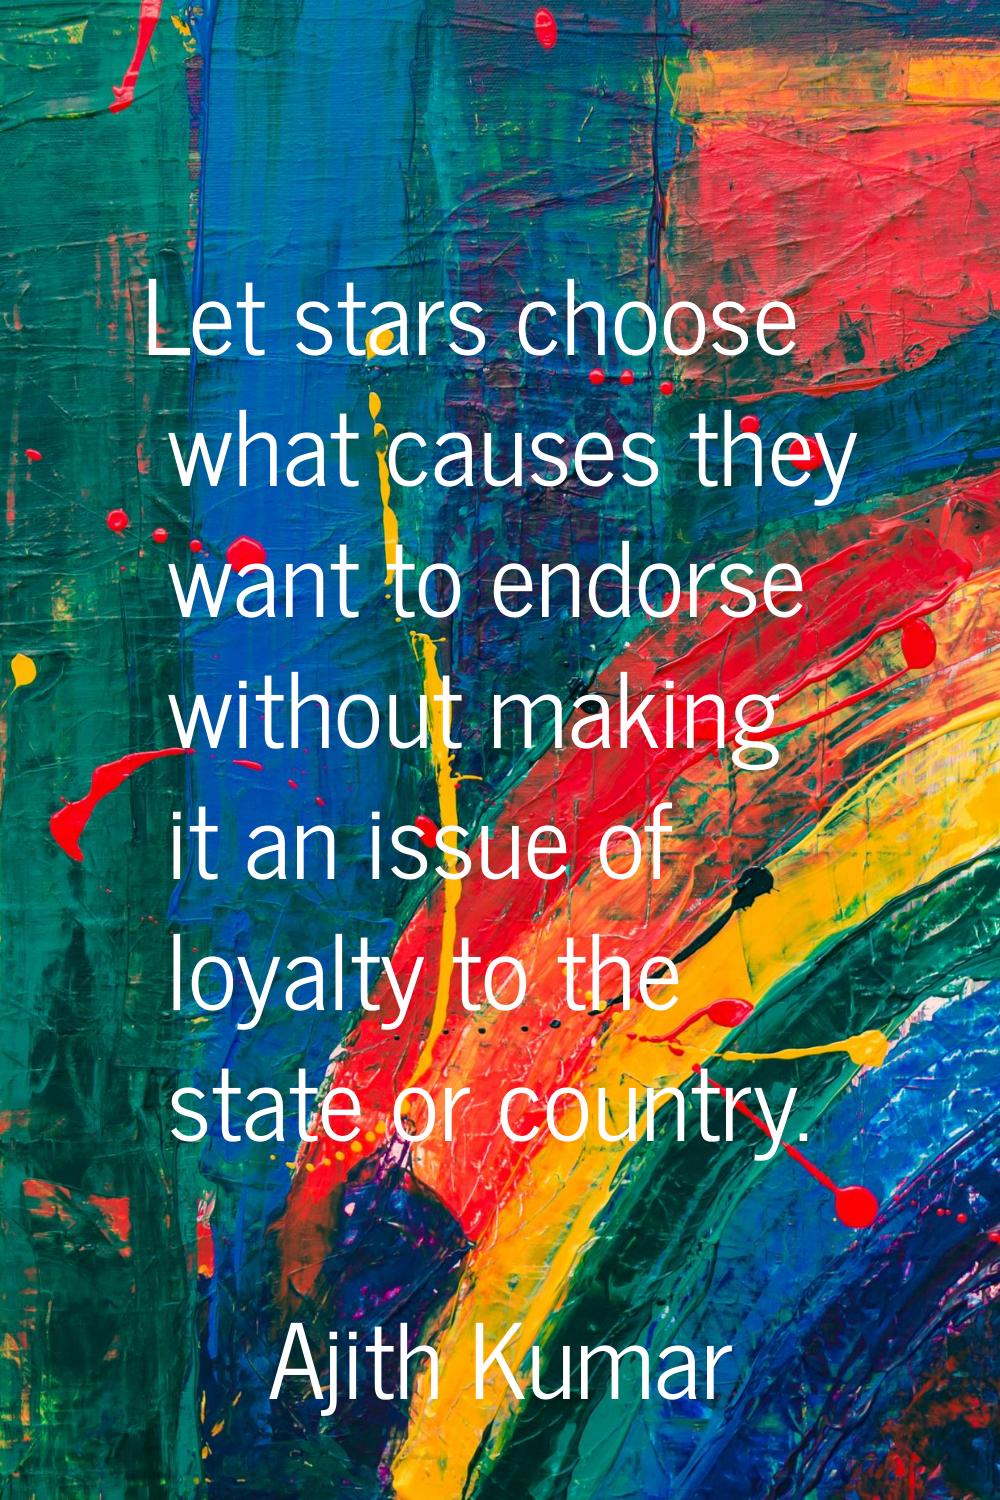 Let stars choose what causes they want to endorse without making it an issue of loyalty to the stat